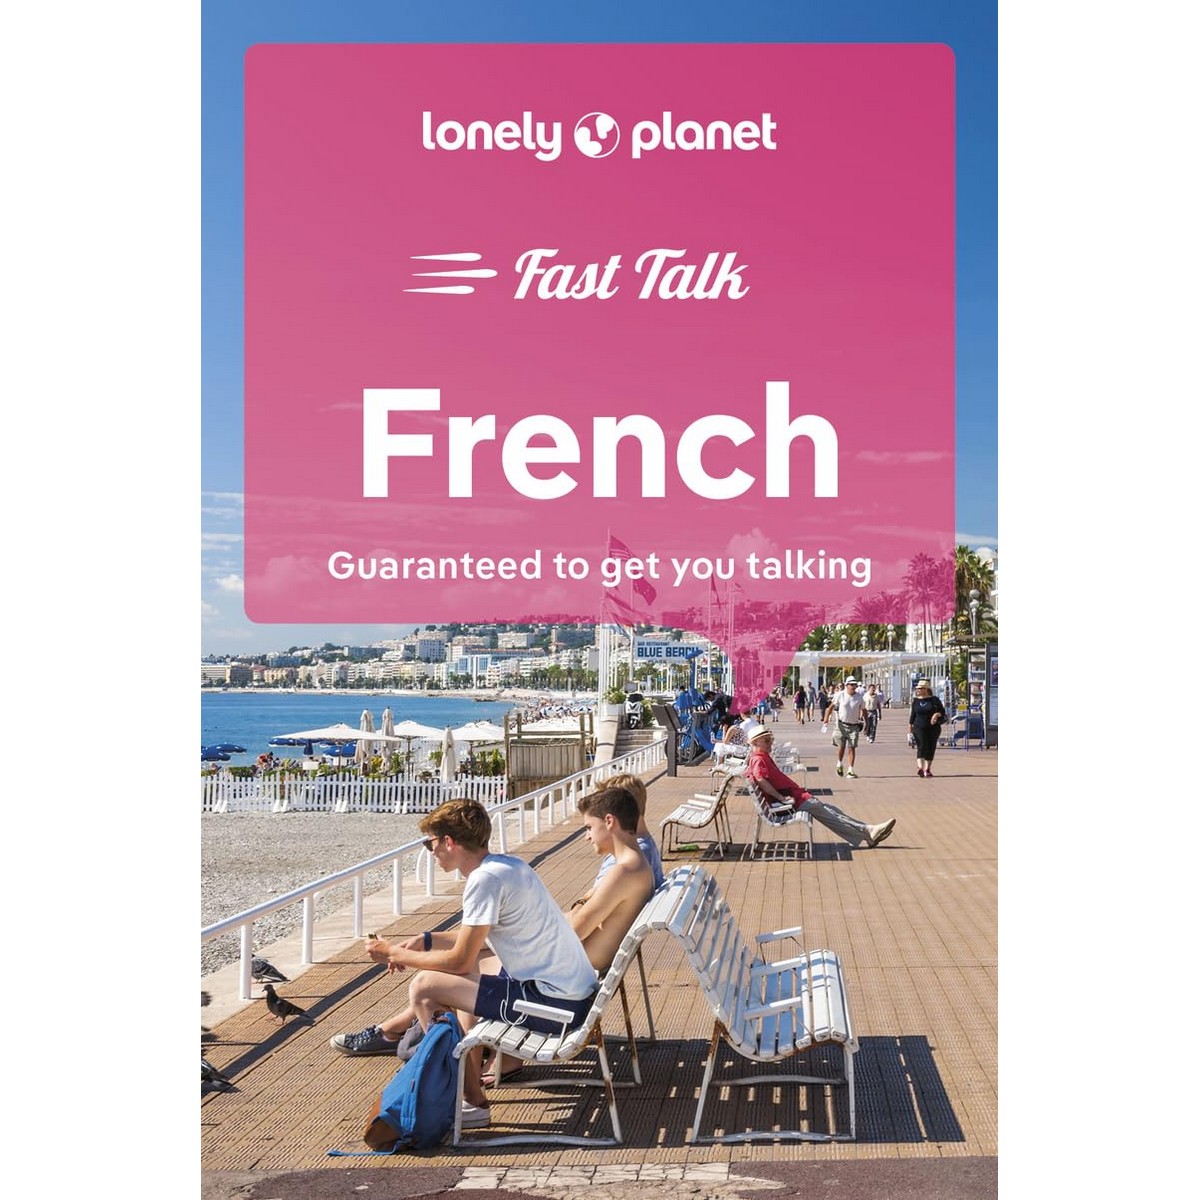 Fast　Planet　French　Talk　of　Kensington　Lonely　Peter's